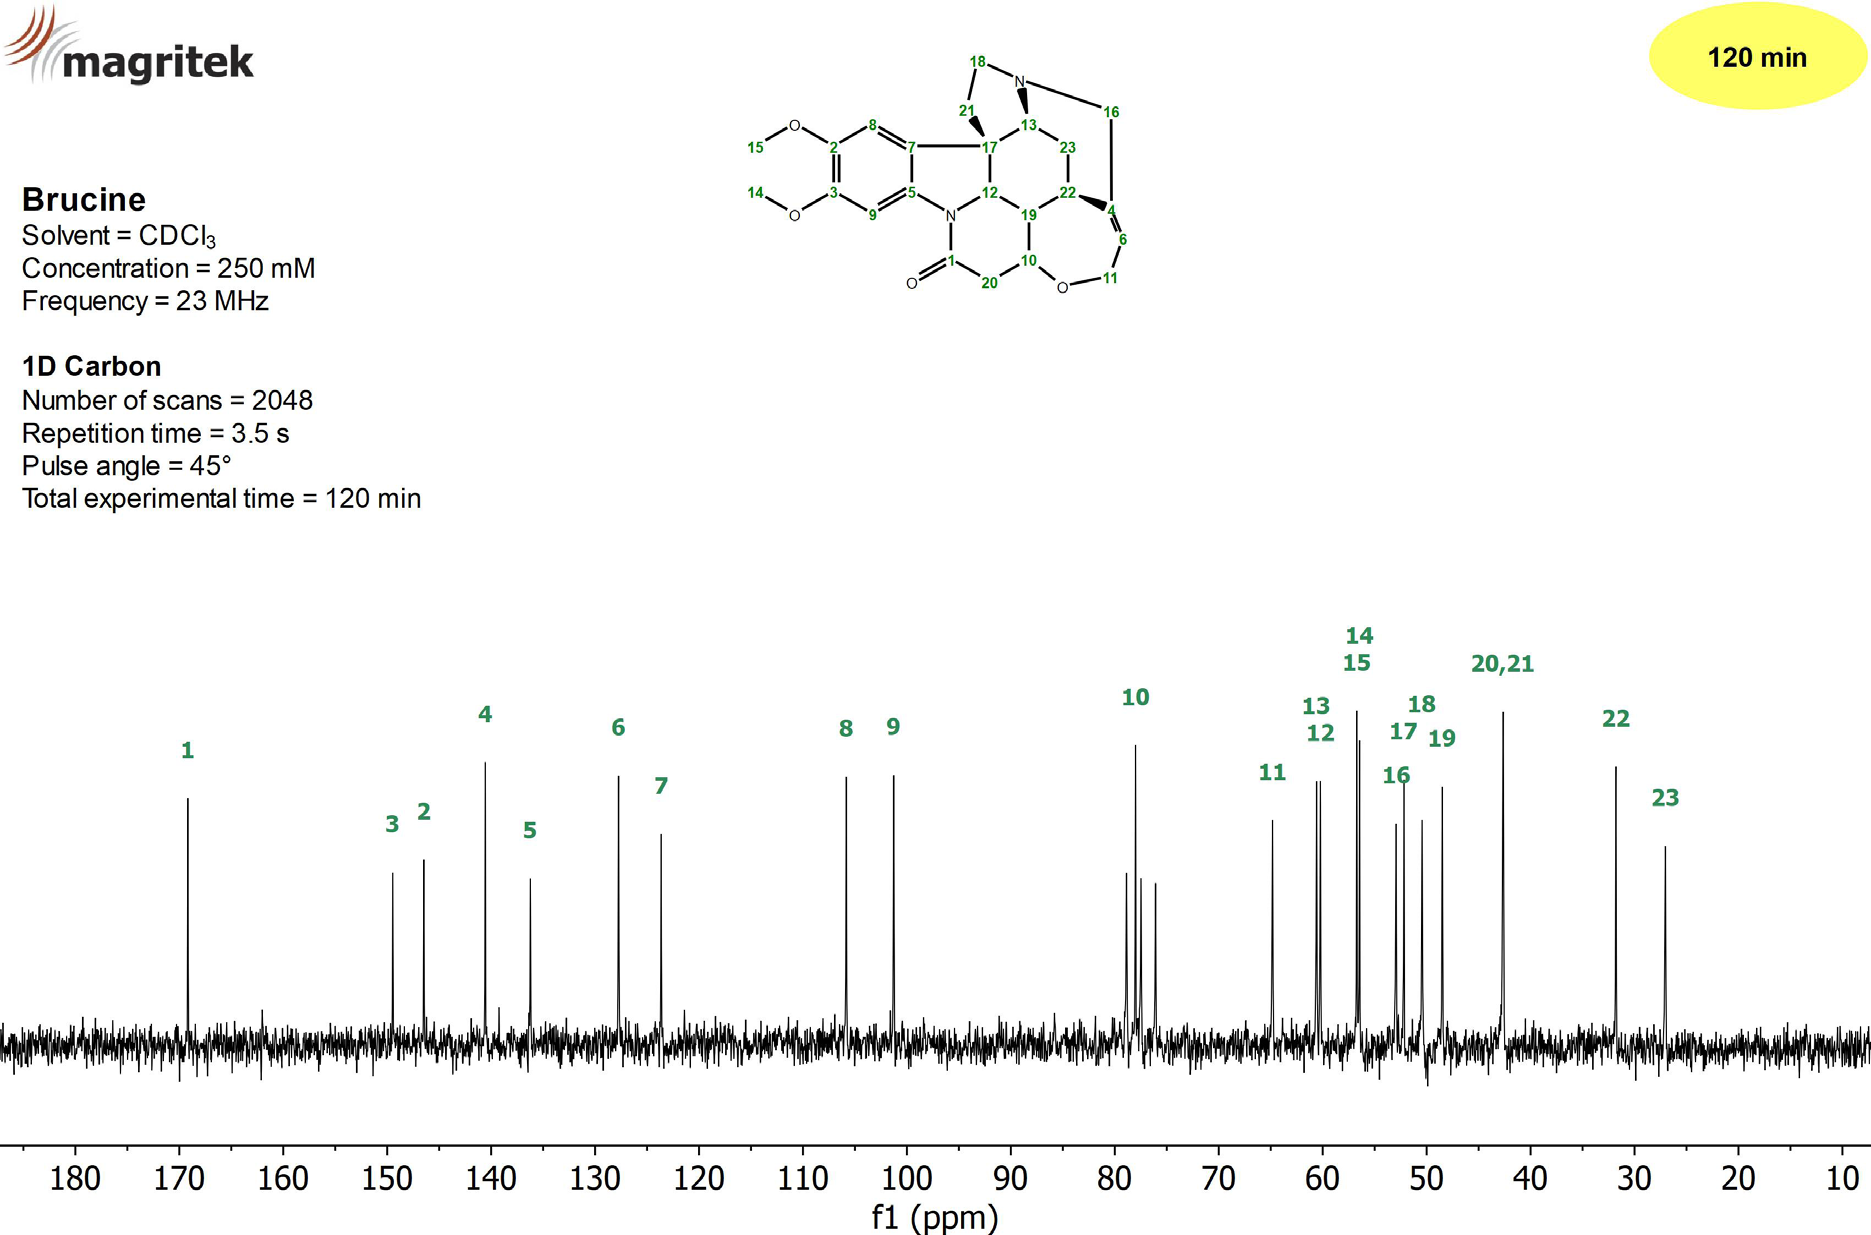 13C NMR spectrum of a 250 mM Brucine sample in CDCl3 measured on a Spinsolve 90 MHz system in 120 minutes.